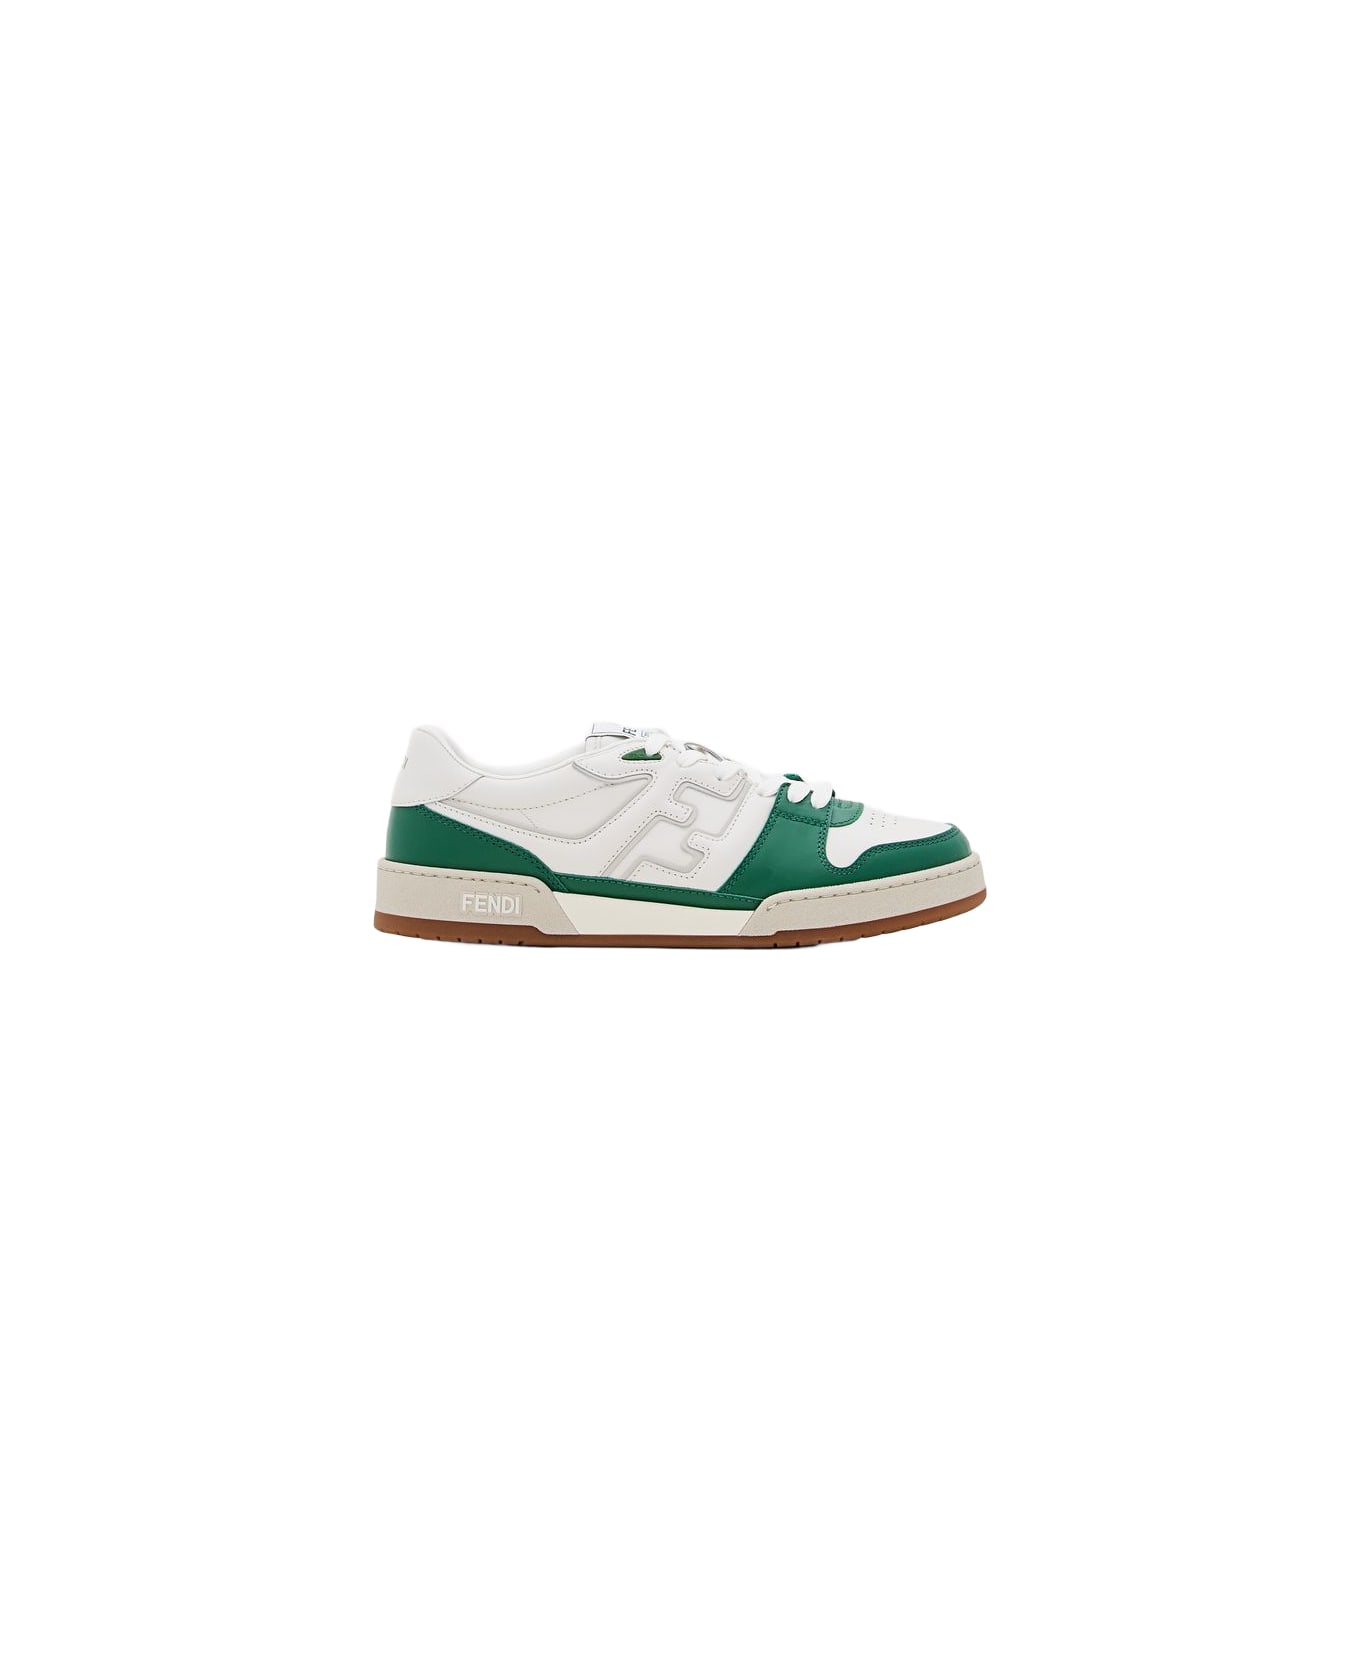 Fendi Match Low-top Sneakers - Emerald White Ice スニーカー